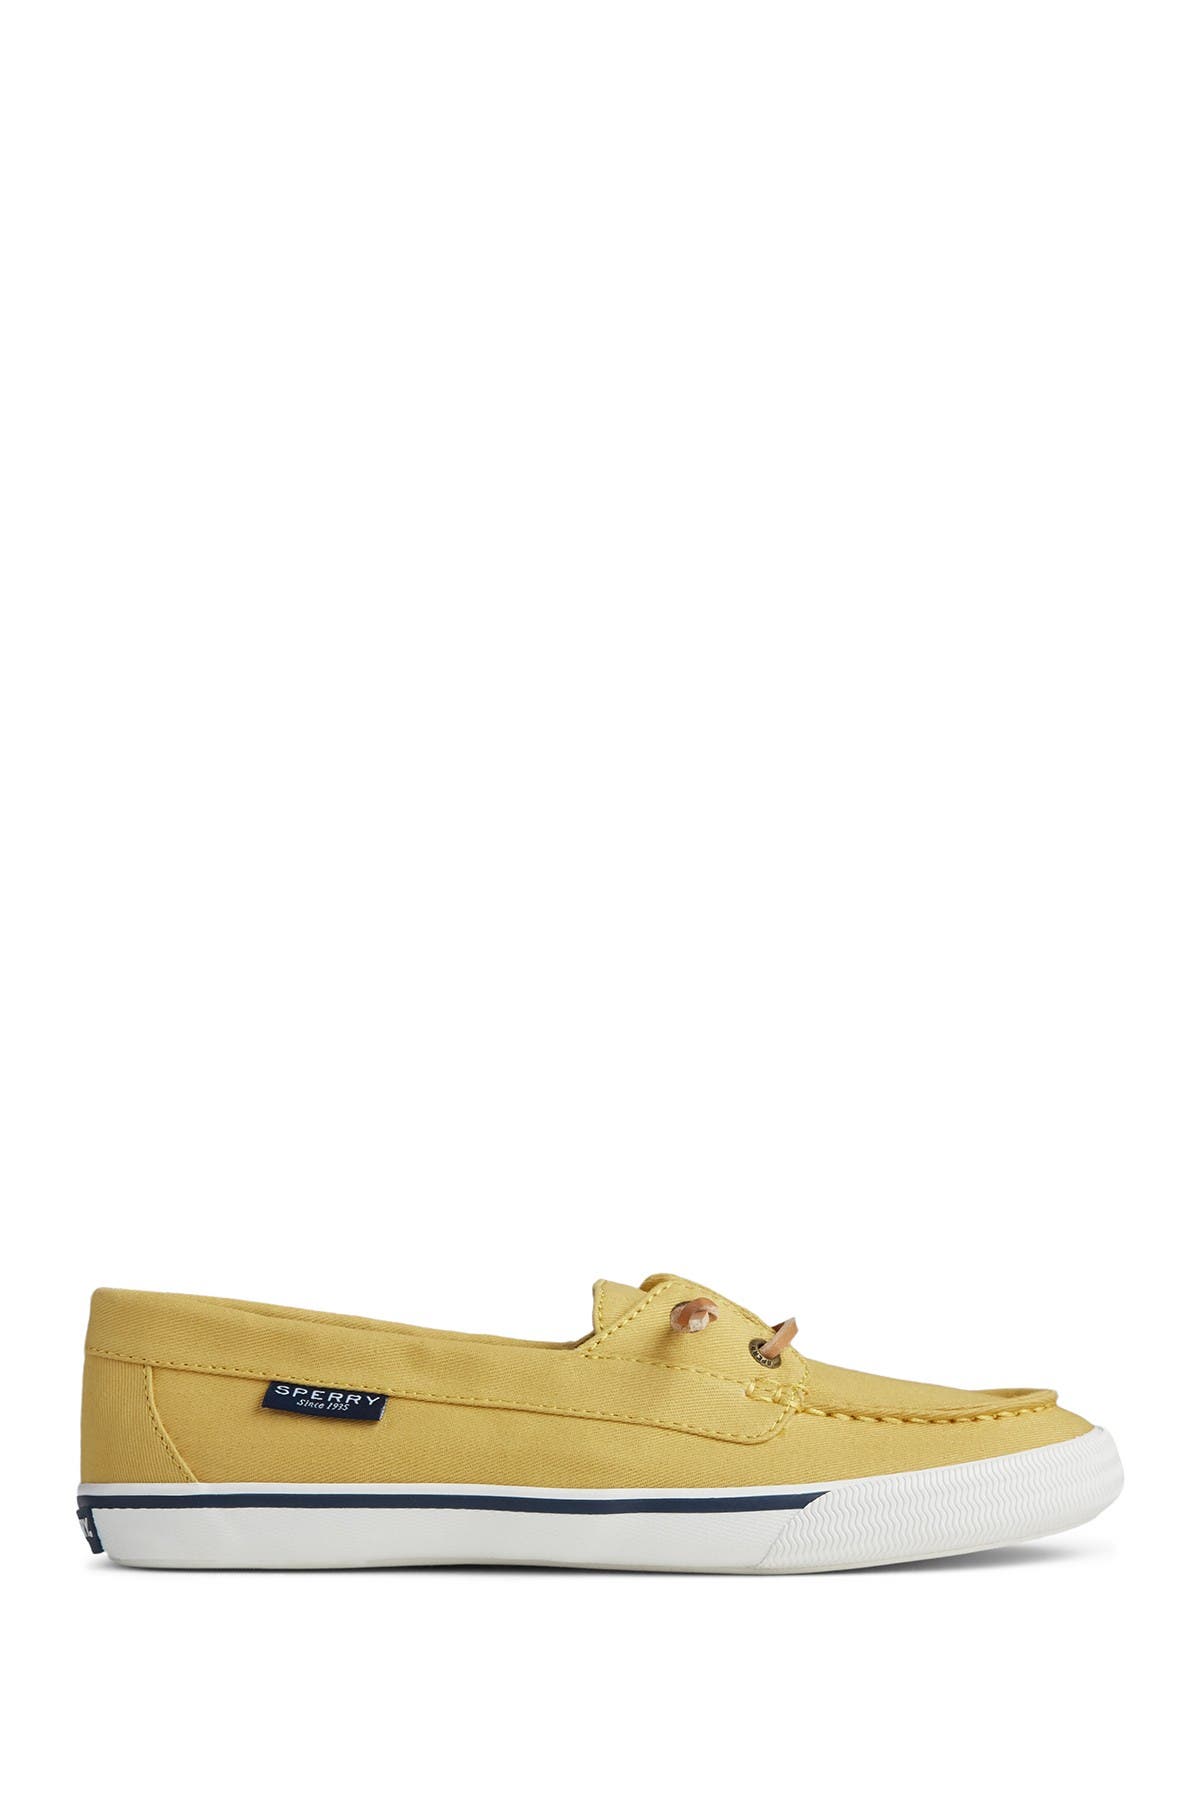 sperry lounge away yellow